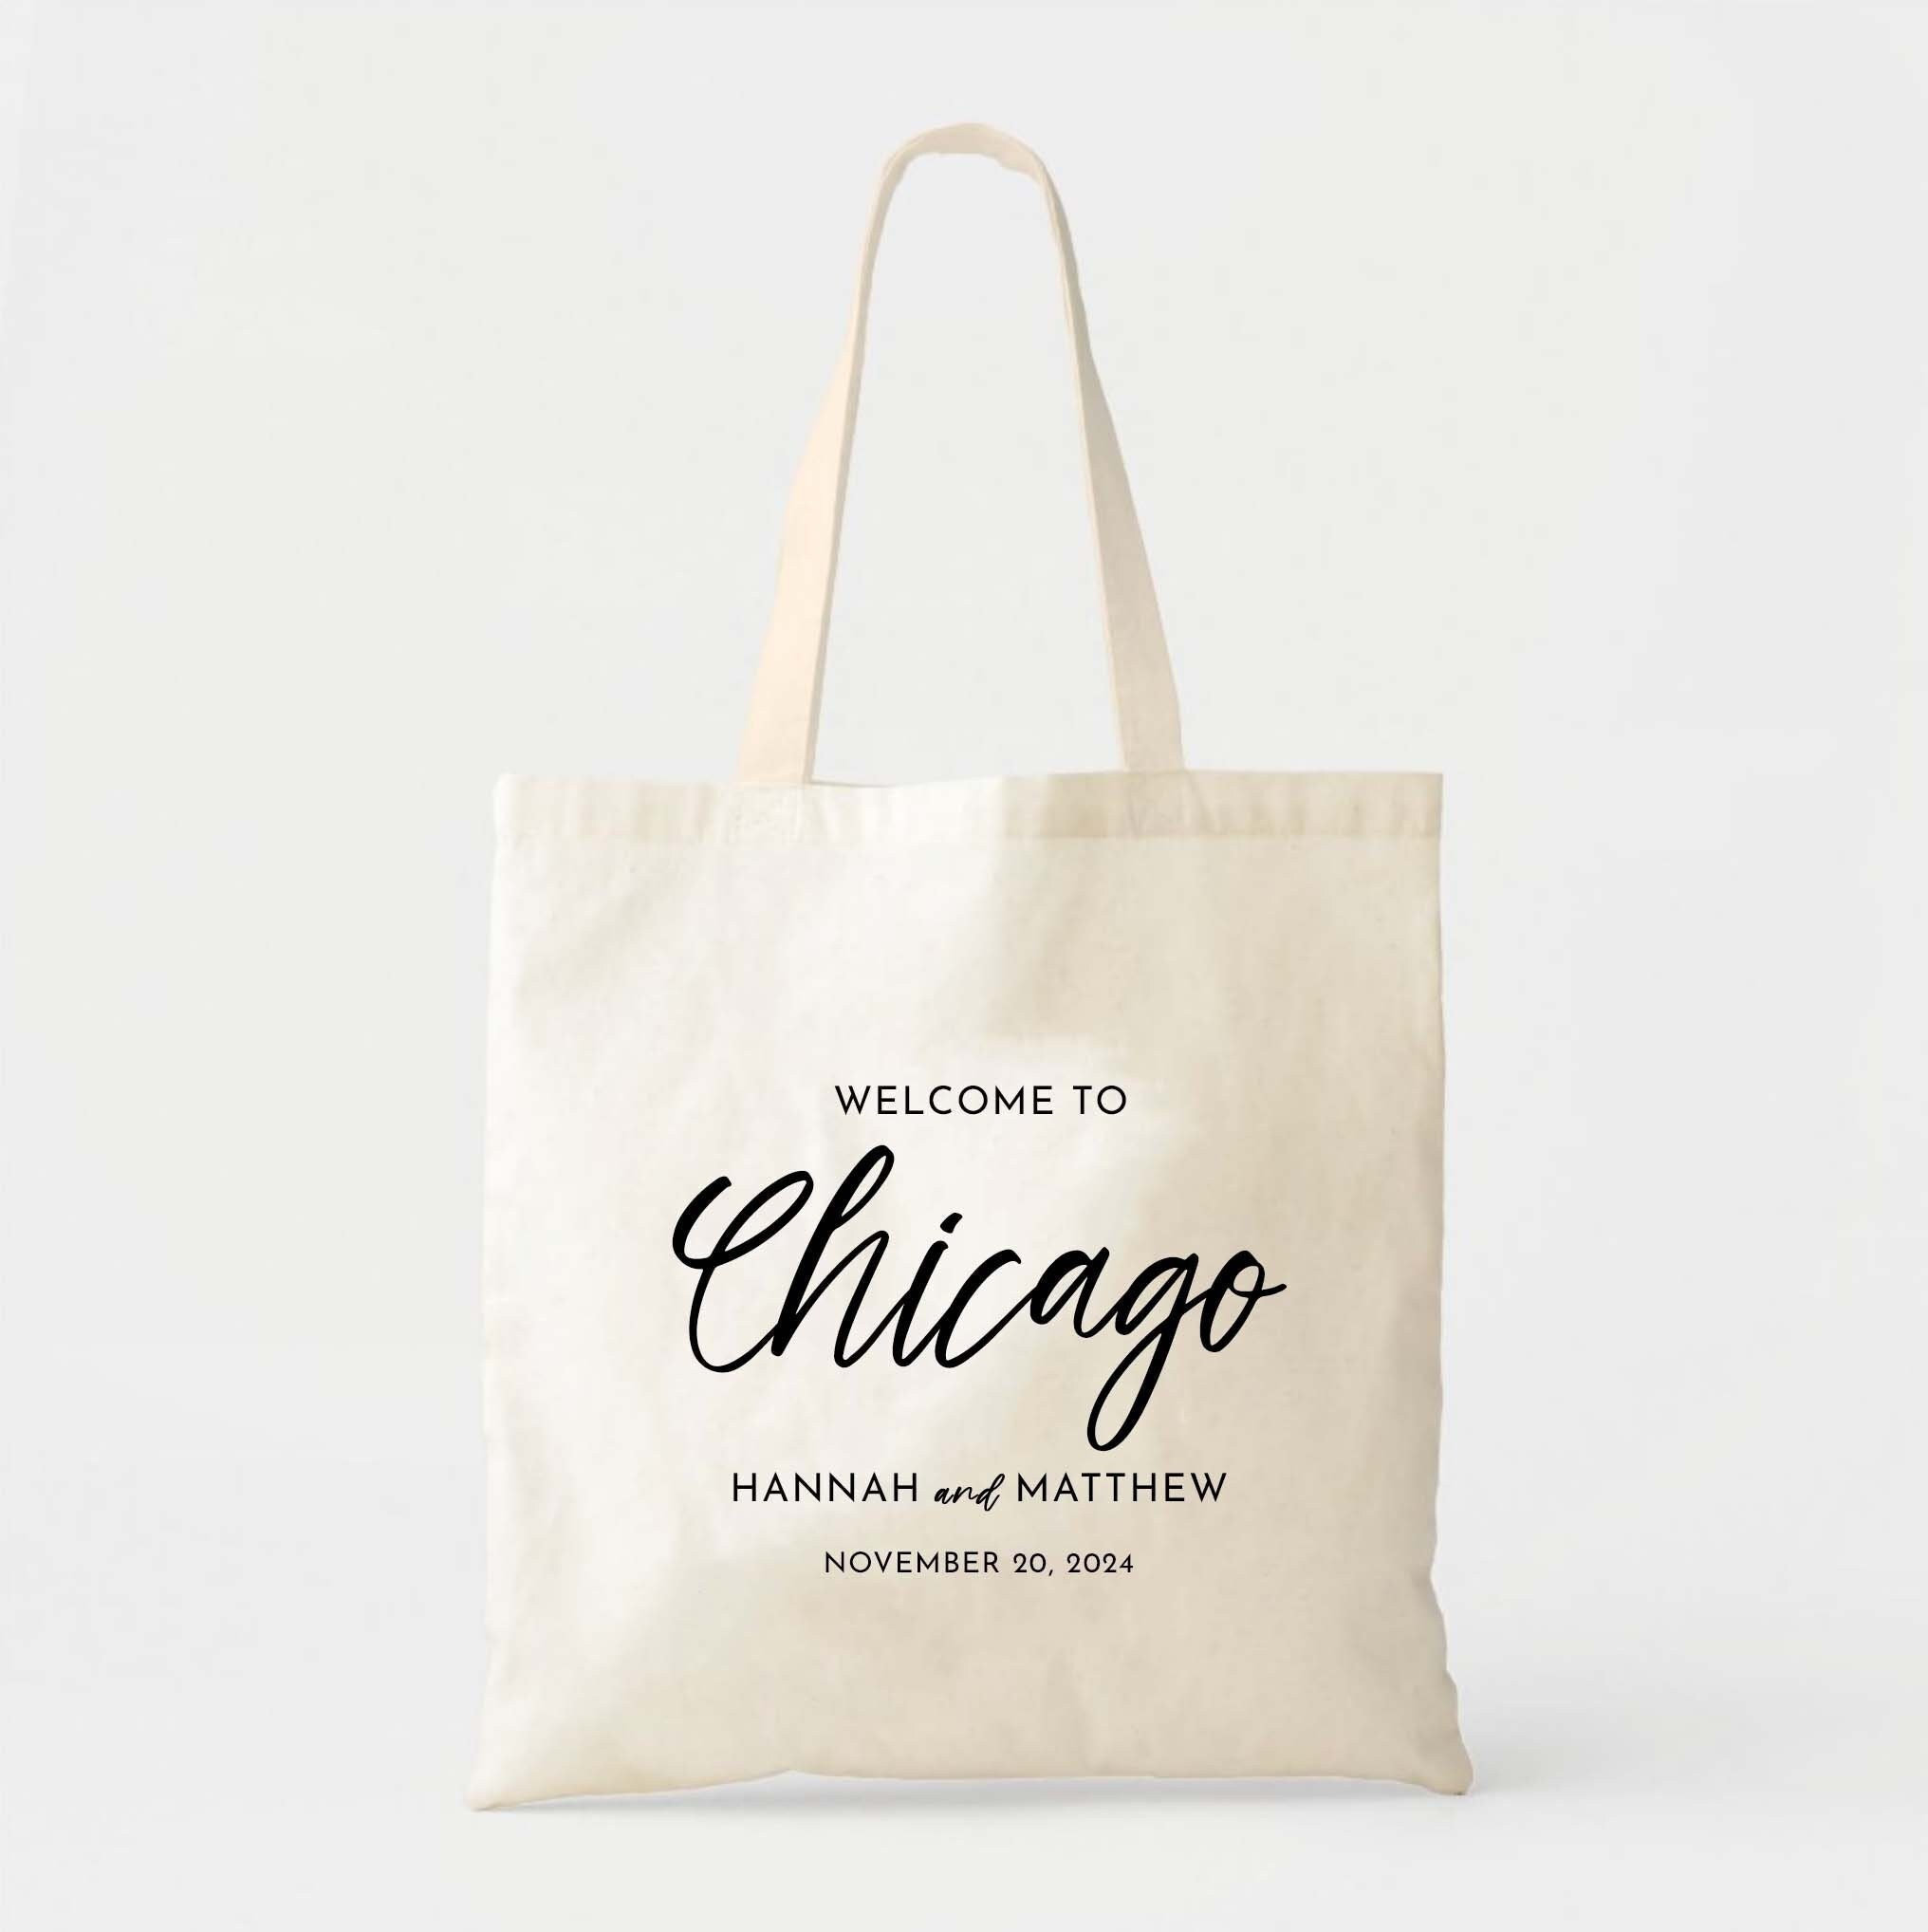 Chicago Cubs Wrigley Field Tote Bag Wedding Welcome Bag 